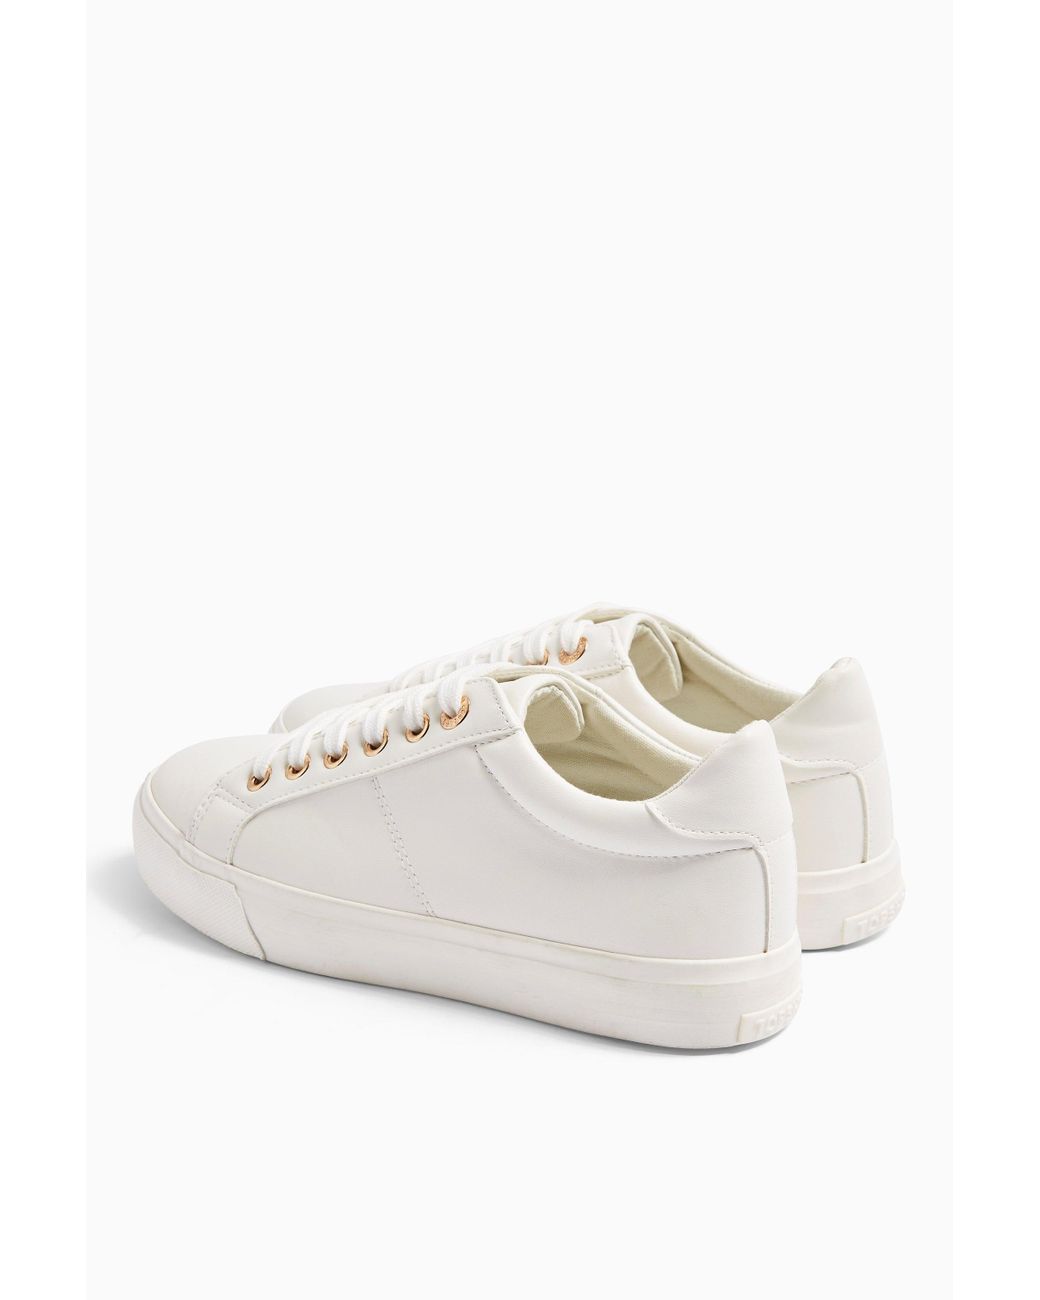 TOPSHOP Camdenlace Up Sneakers in White 